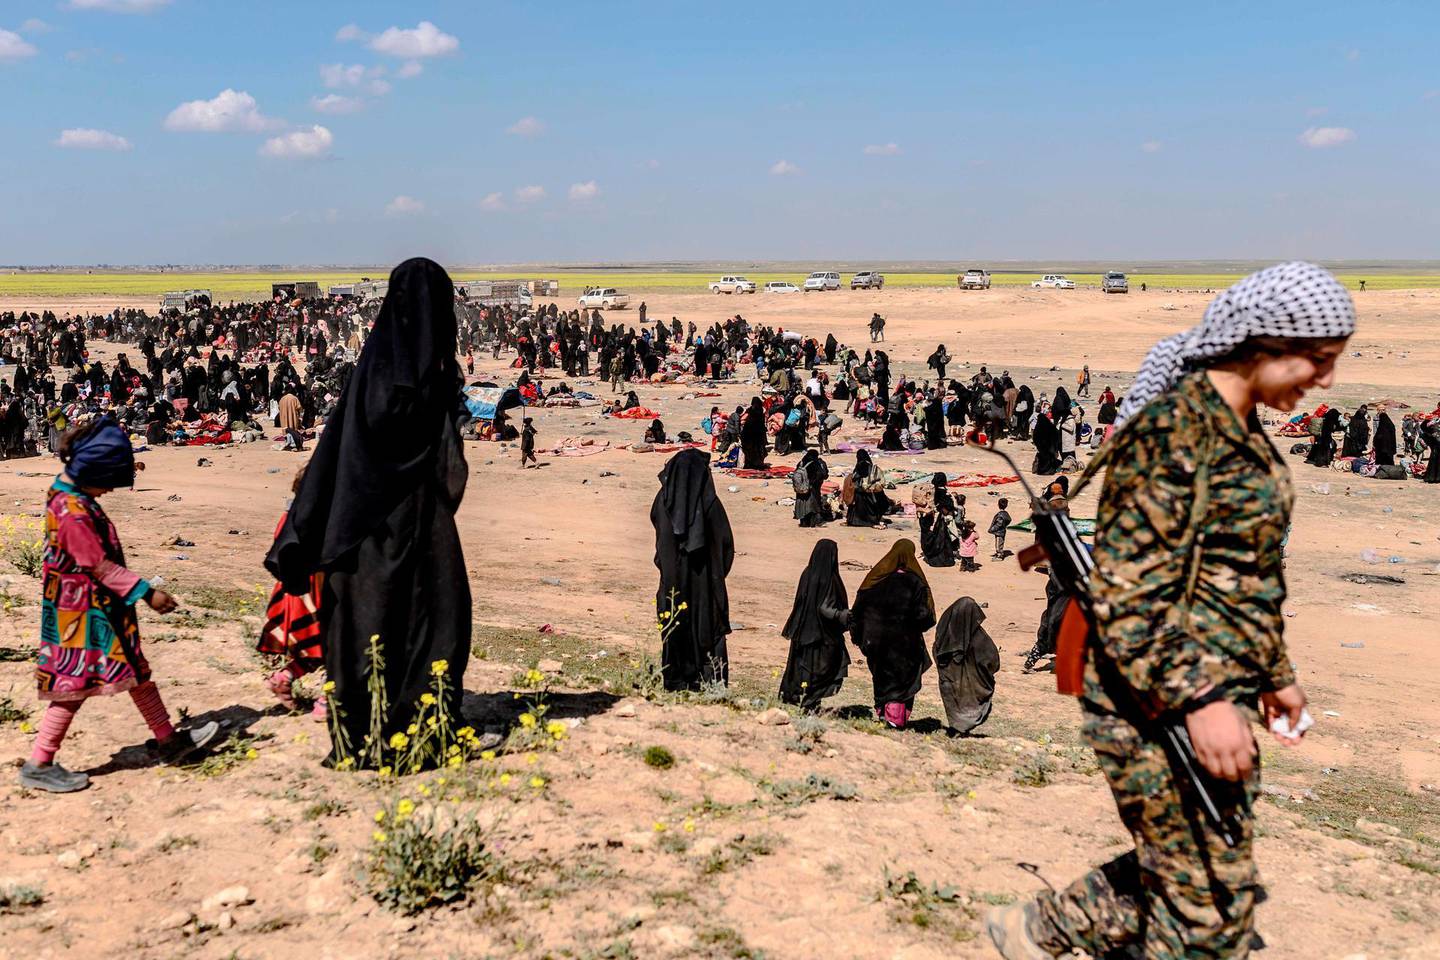 Women and children evacuated from the Islamic State (IS) group's embattled holdout of Baghouz arrive at a screening area held by the US-backed Kurdish-led Syrian Democratic Forces (SDF), in the eastern Syrian province of Deir Ezzor, on March 6, 2019. More than 7000 people, mostly women and children, have fled the shrinking pocket over the past days, as US-backed forces press ahead with an offensive to crush holdout jihadists. / AFP / Bulent KILIC
